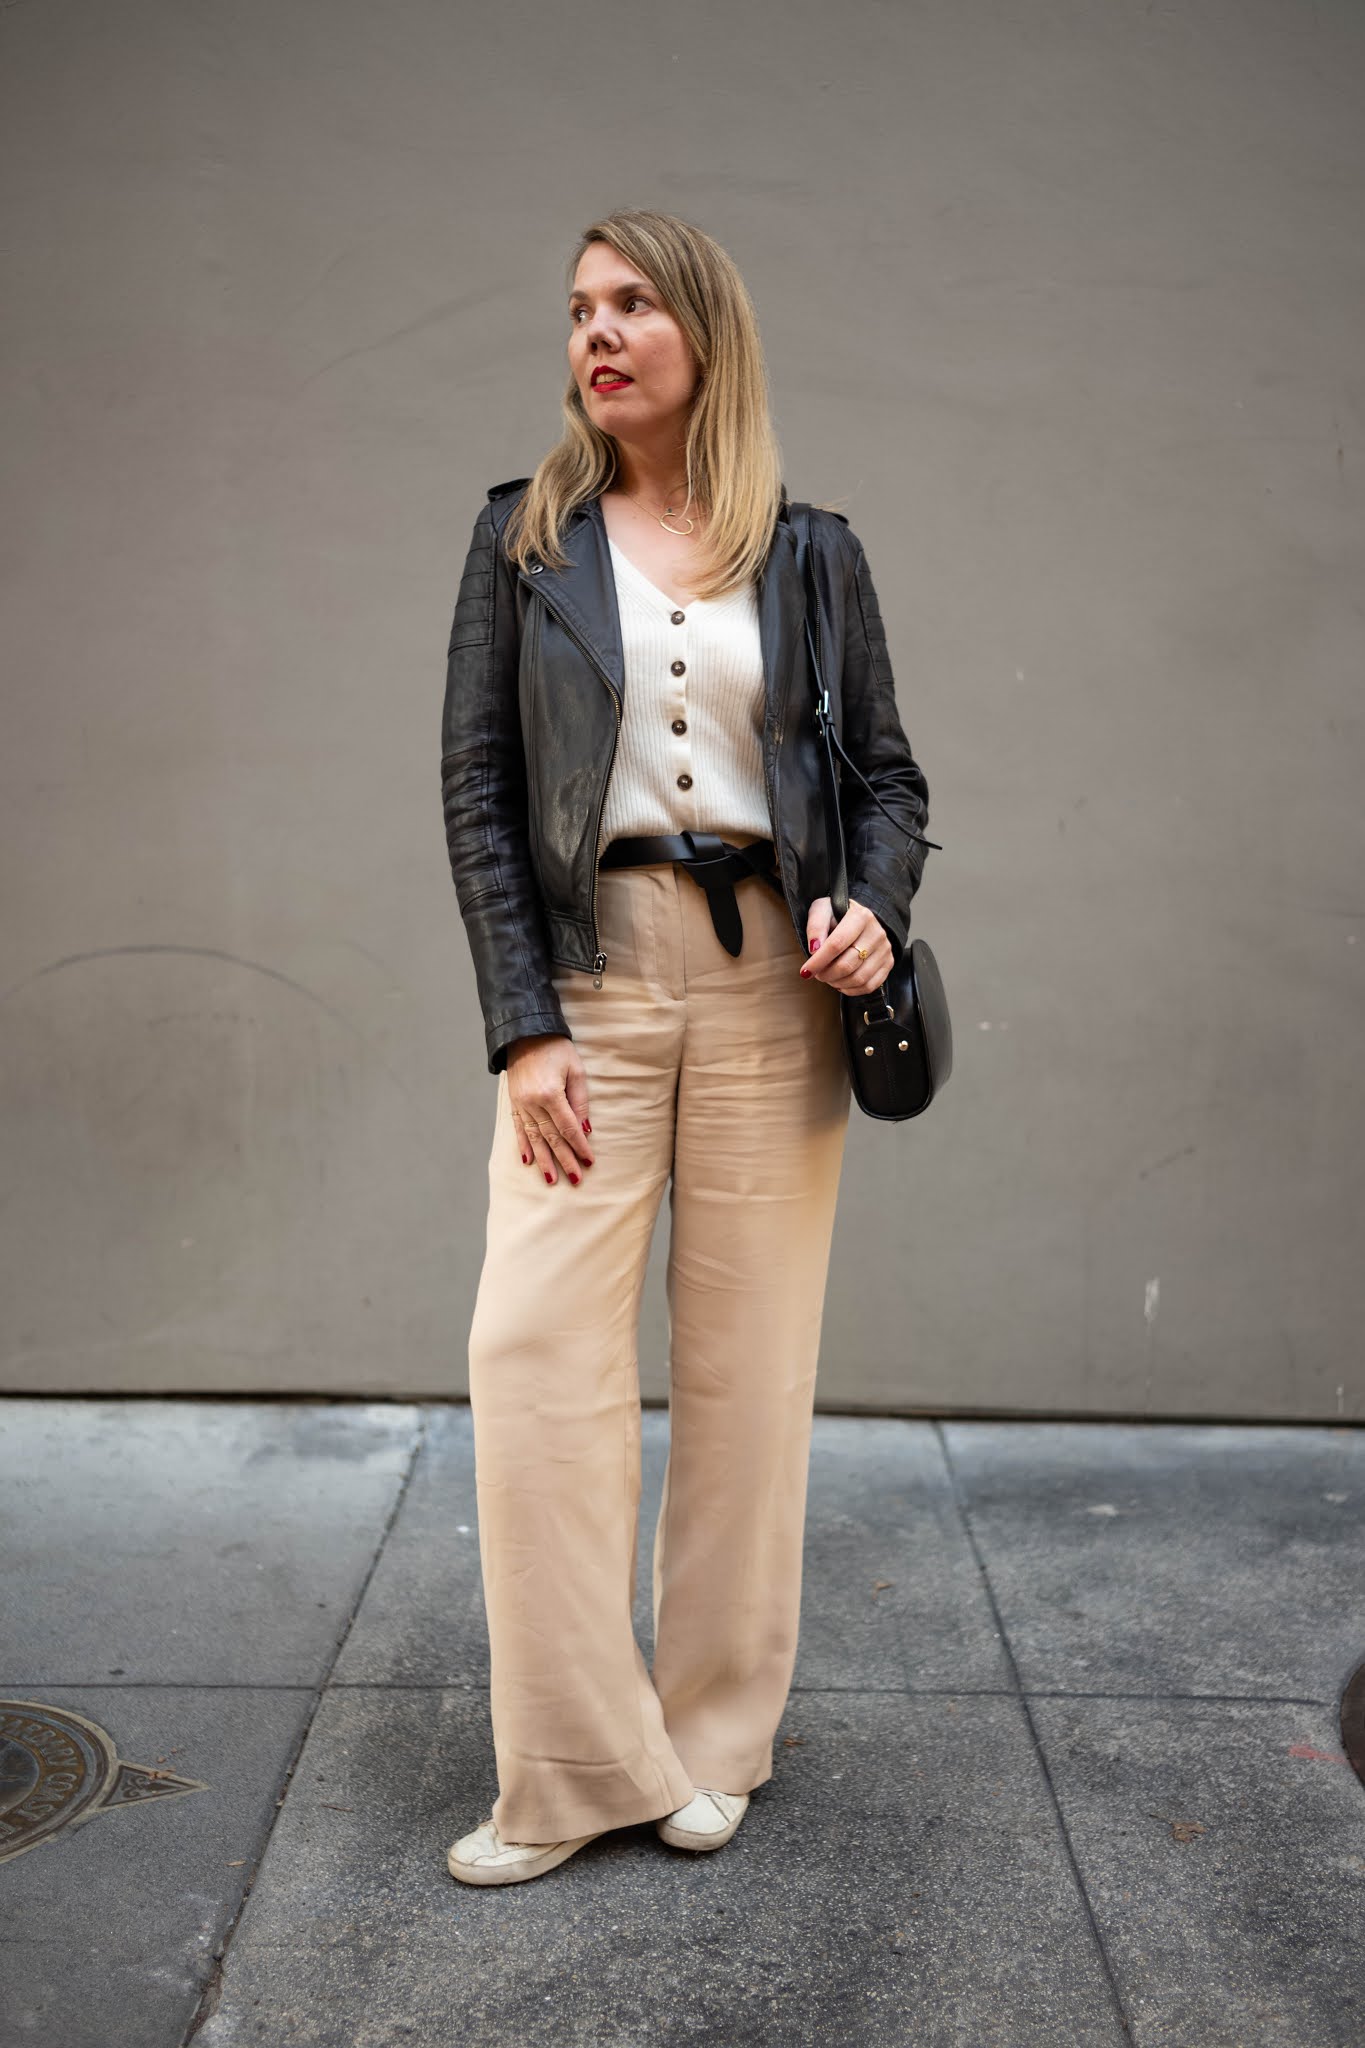 What to wear with khaki pants, according to stylists - TODAY